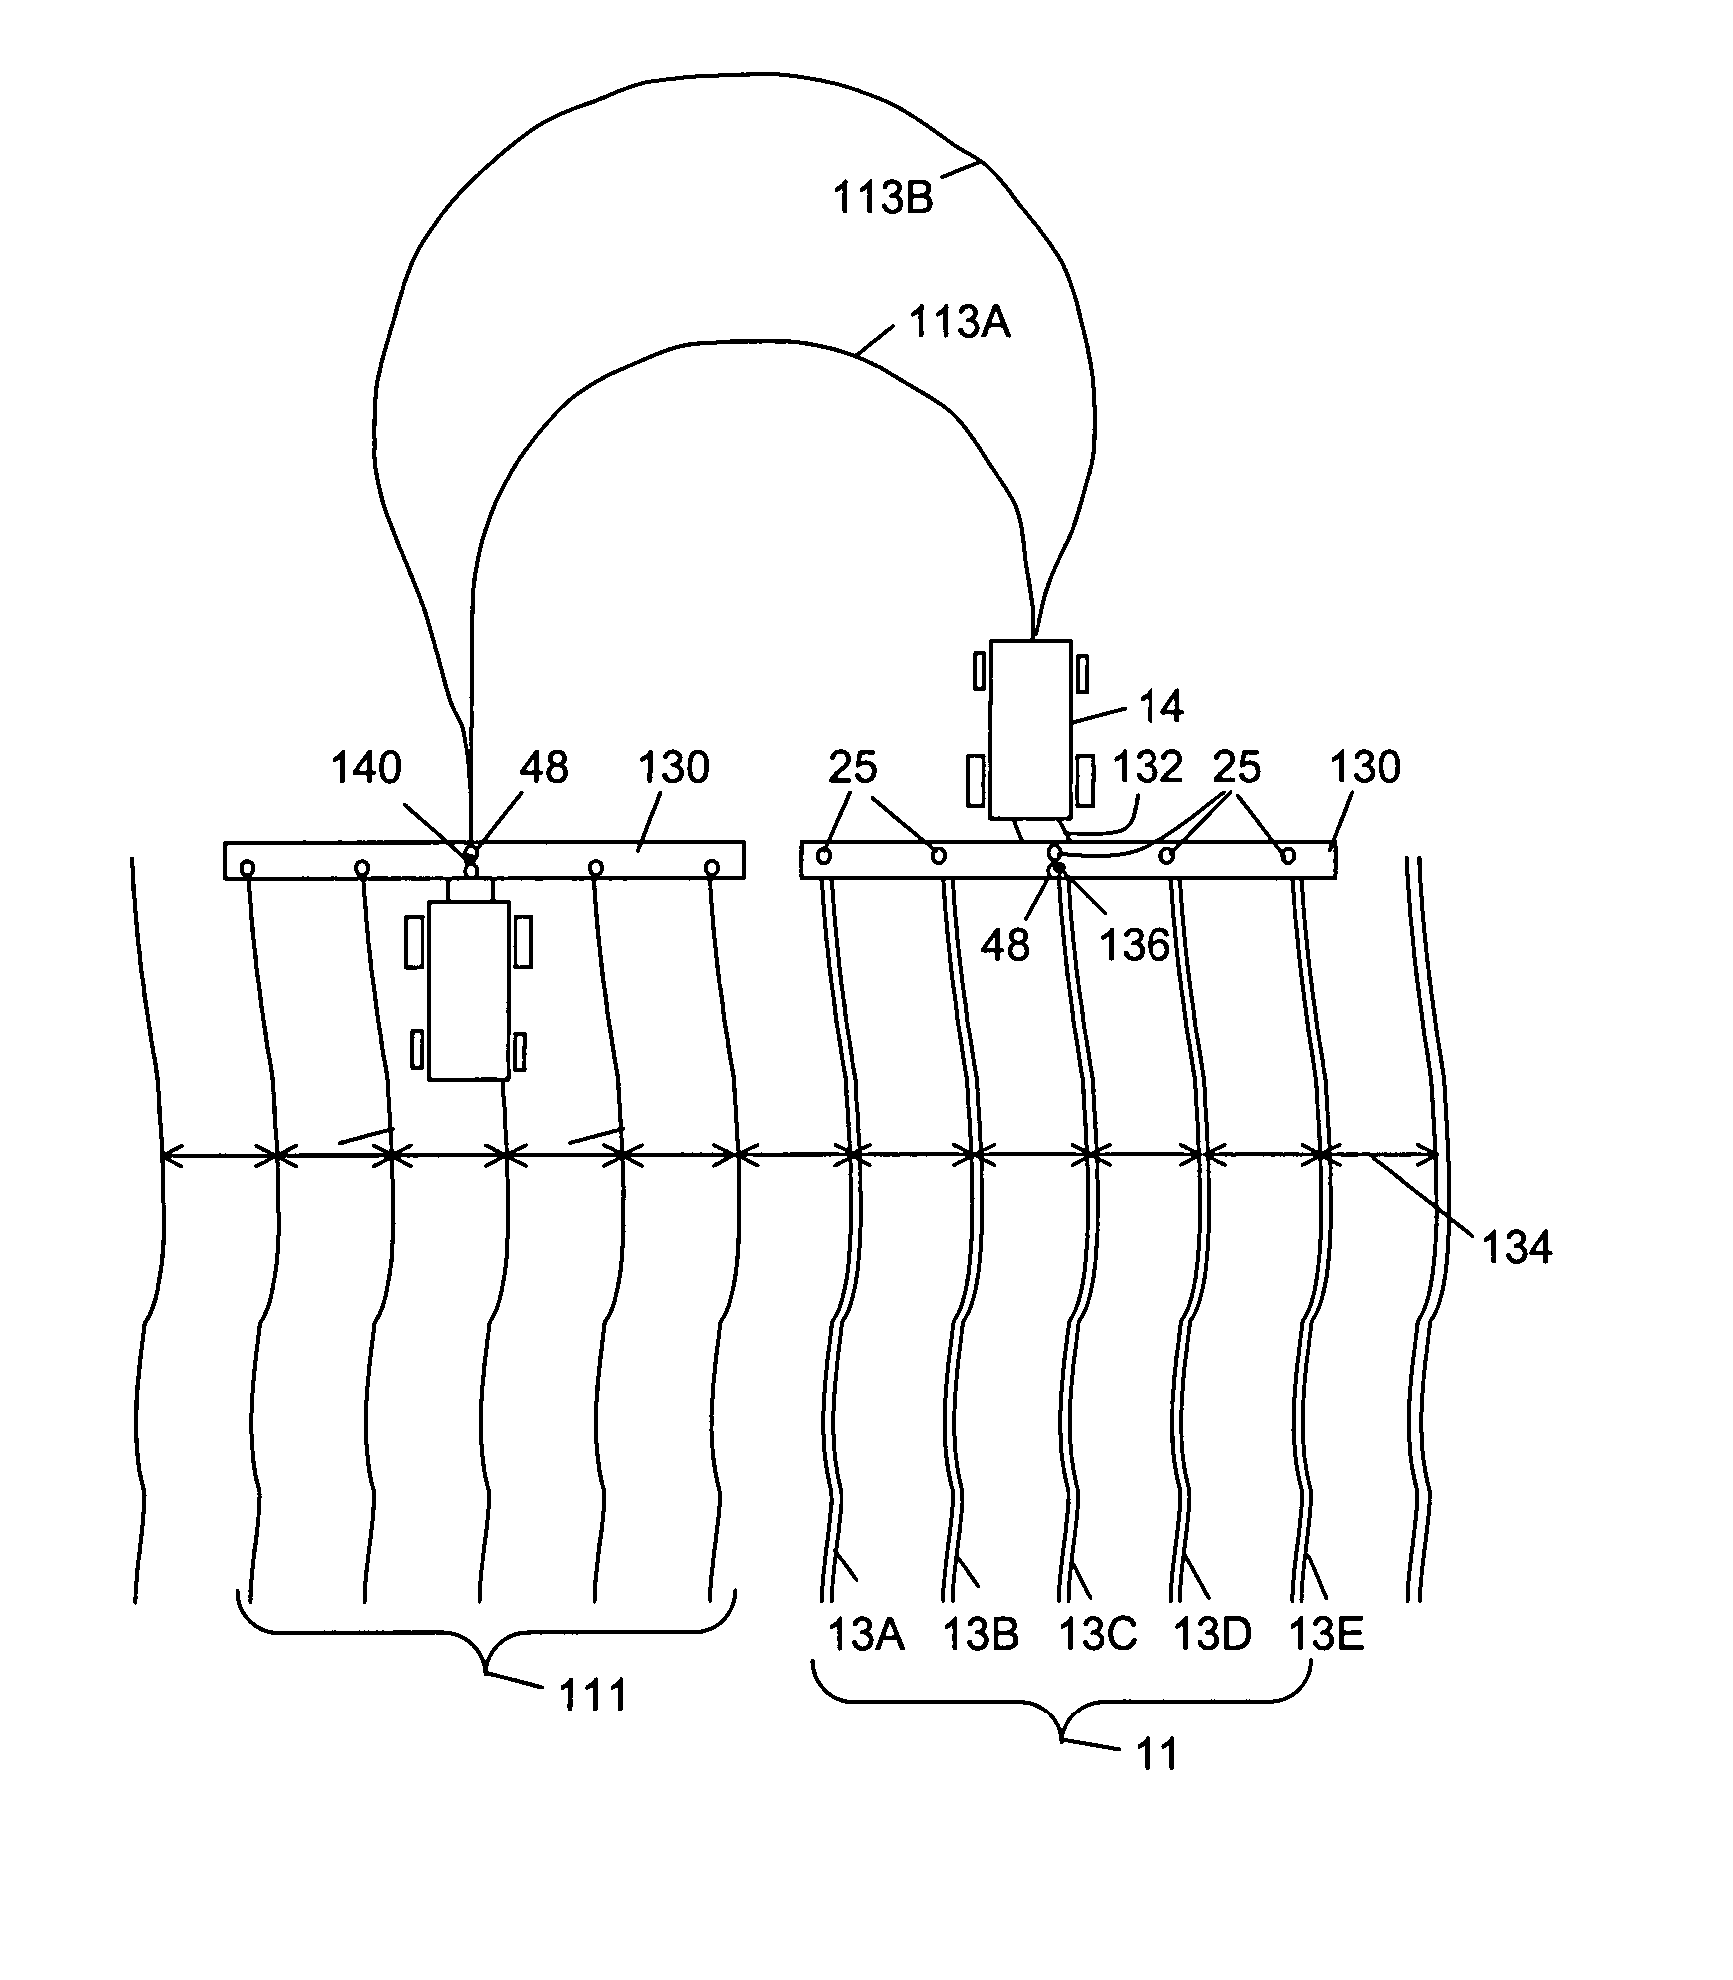 System for guiding a farm implement between swaths